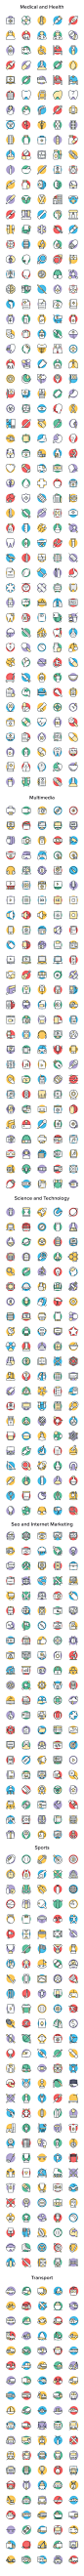 Cool icons5